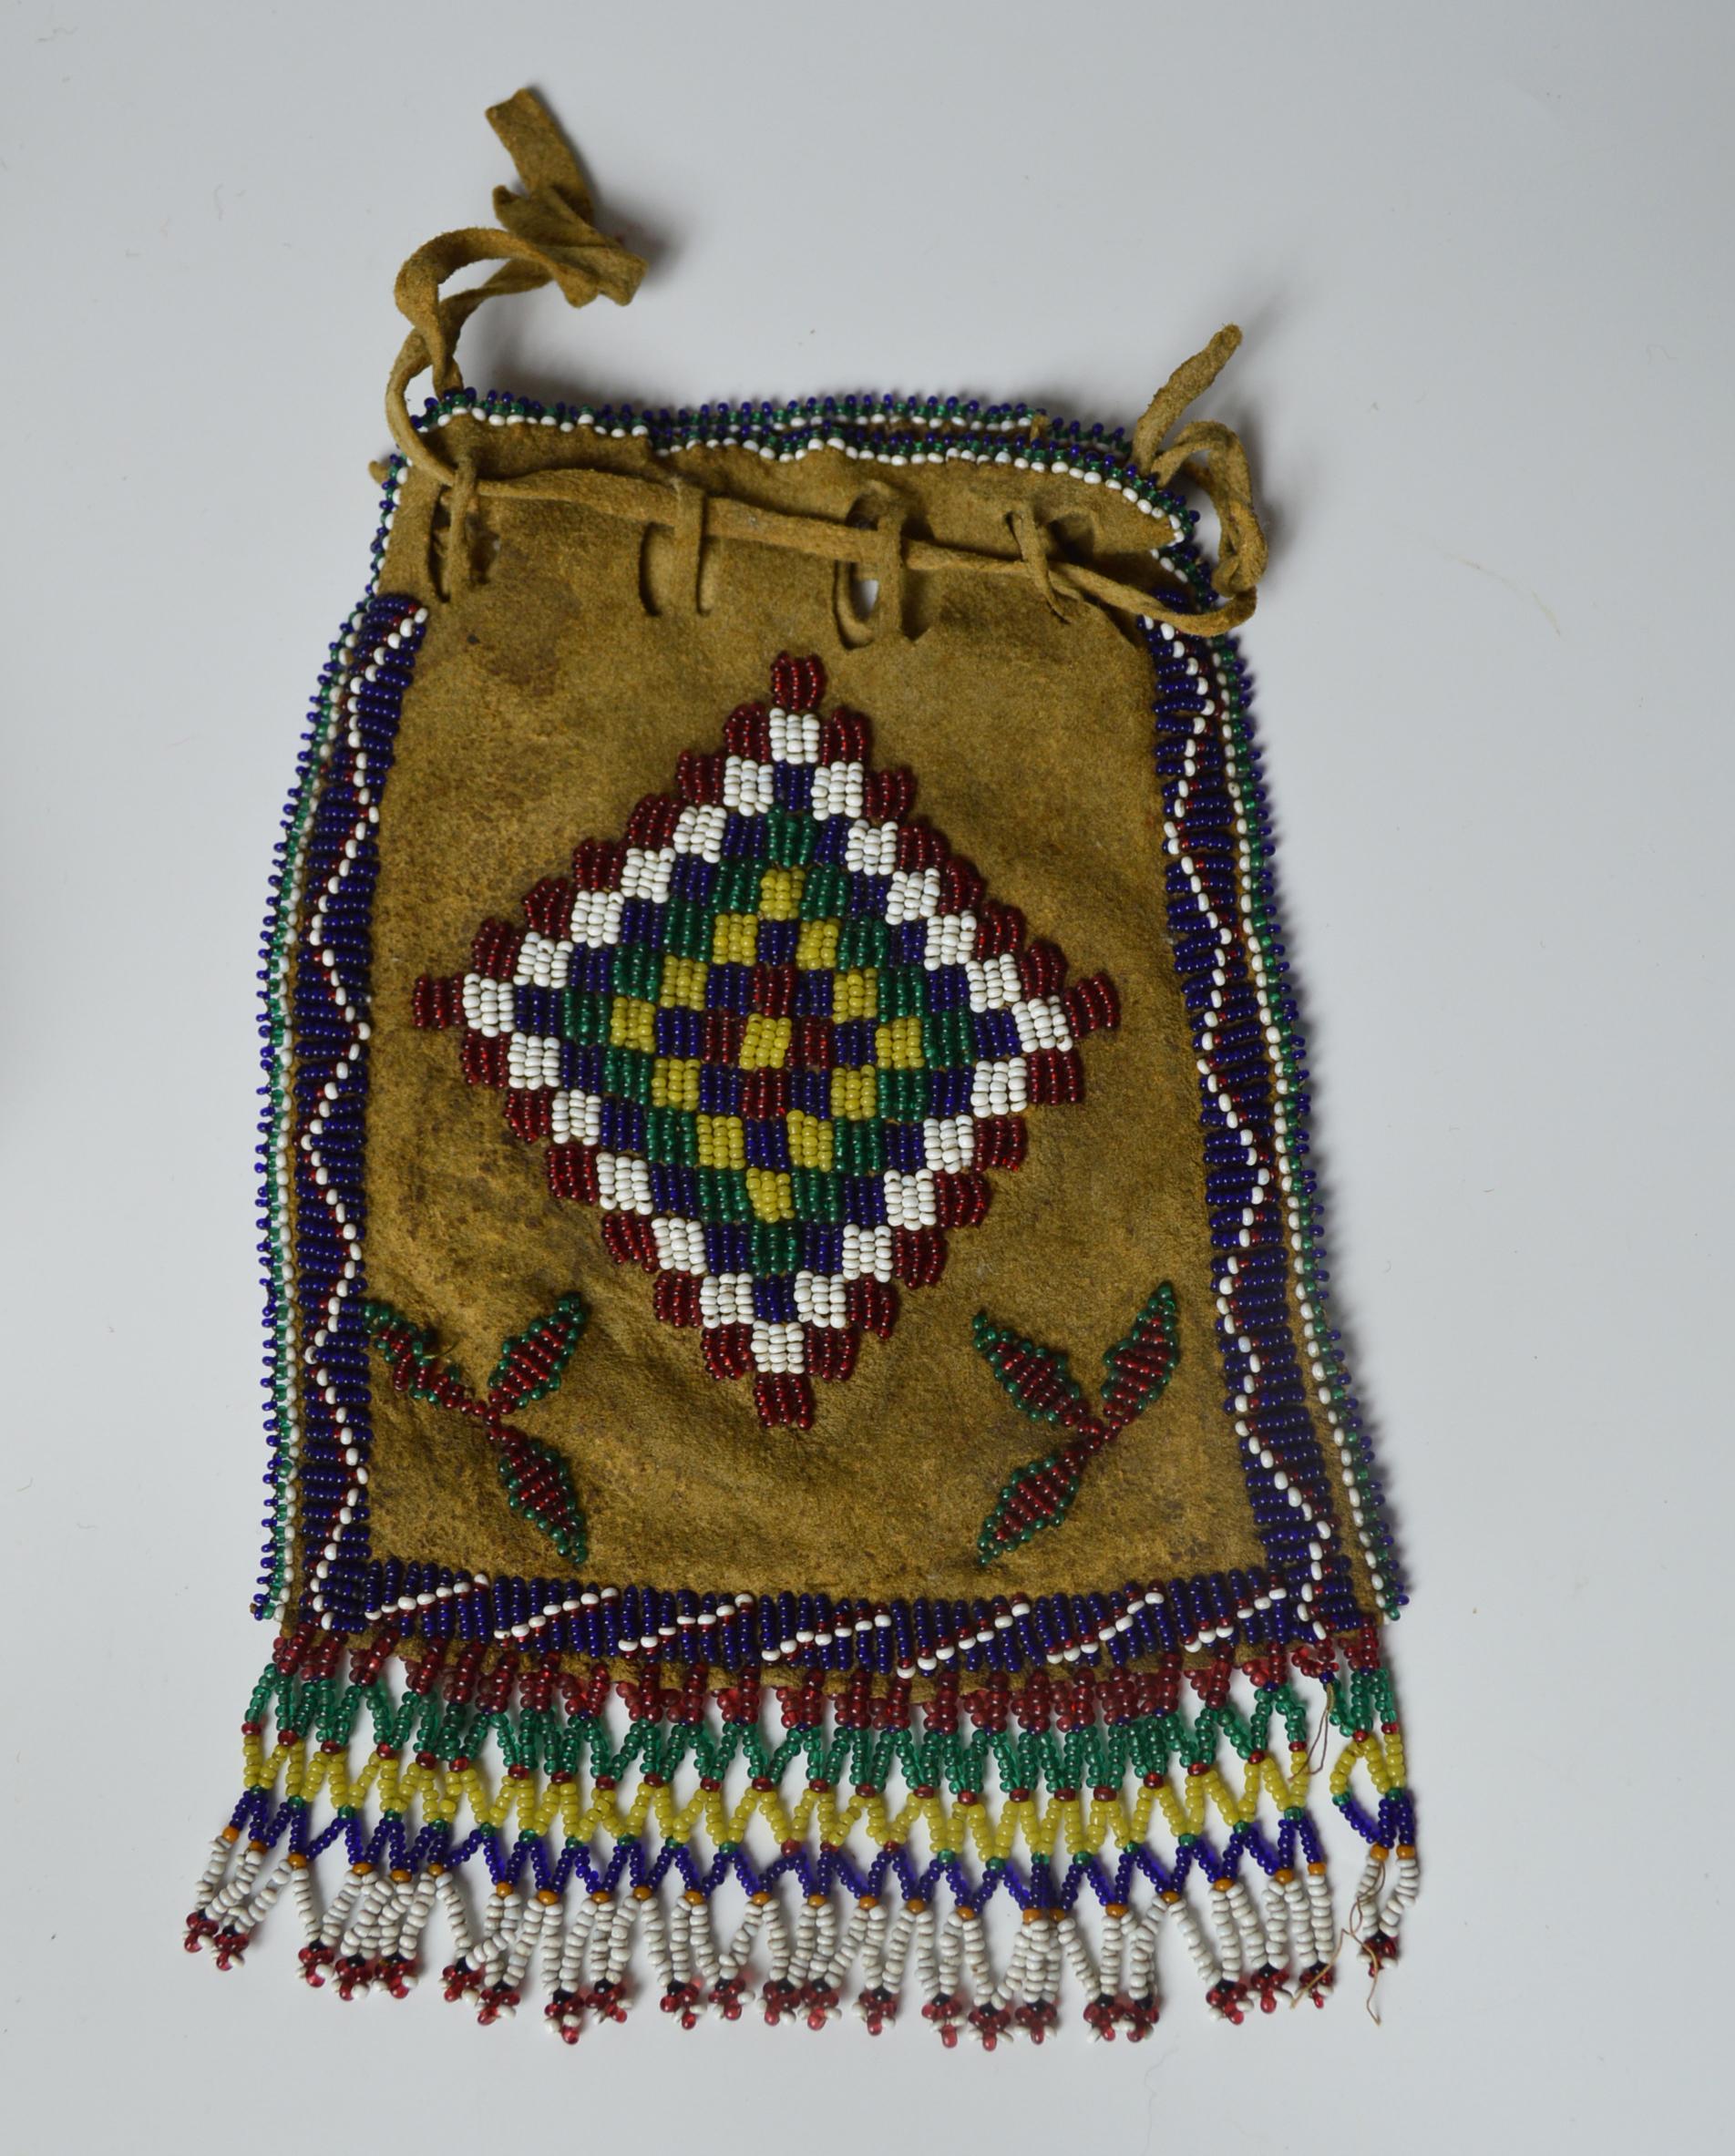 Fine old native American Indian Apache beaded bag
Buckskin, finely beaded on the both sides with glass beads in floral and geometric designs with bottom fringe
Central plains
Measures: Height 17 cm 7 inches,
Period: Late 19th century-early 20th